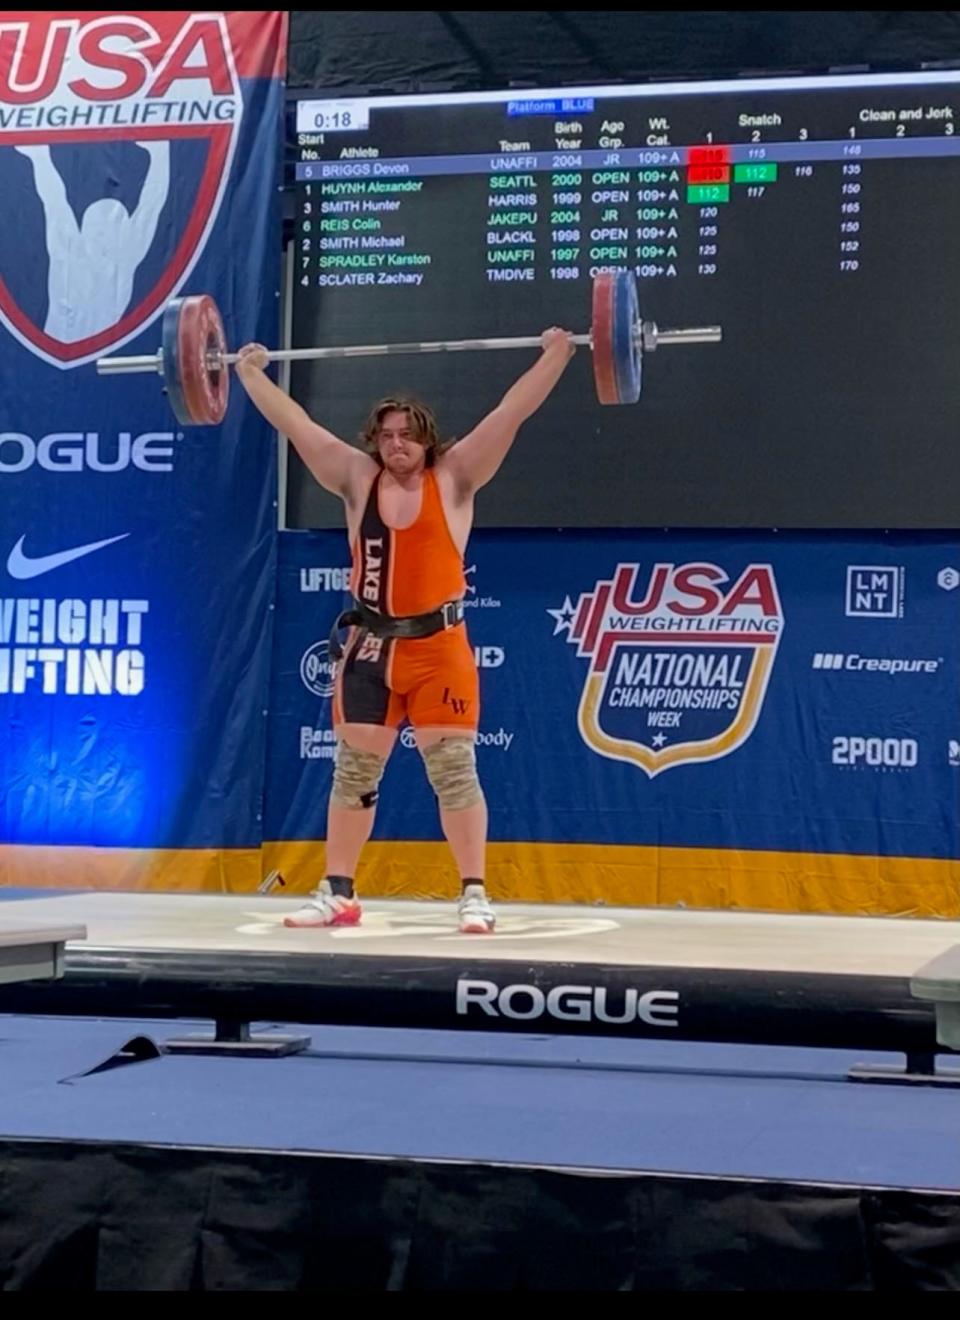 Lake Wales' Devon Briggs lifts 253 pounds in his first attempt at the USA nationals last month. He placed second overall.